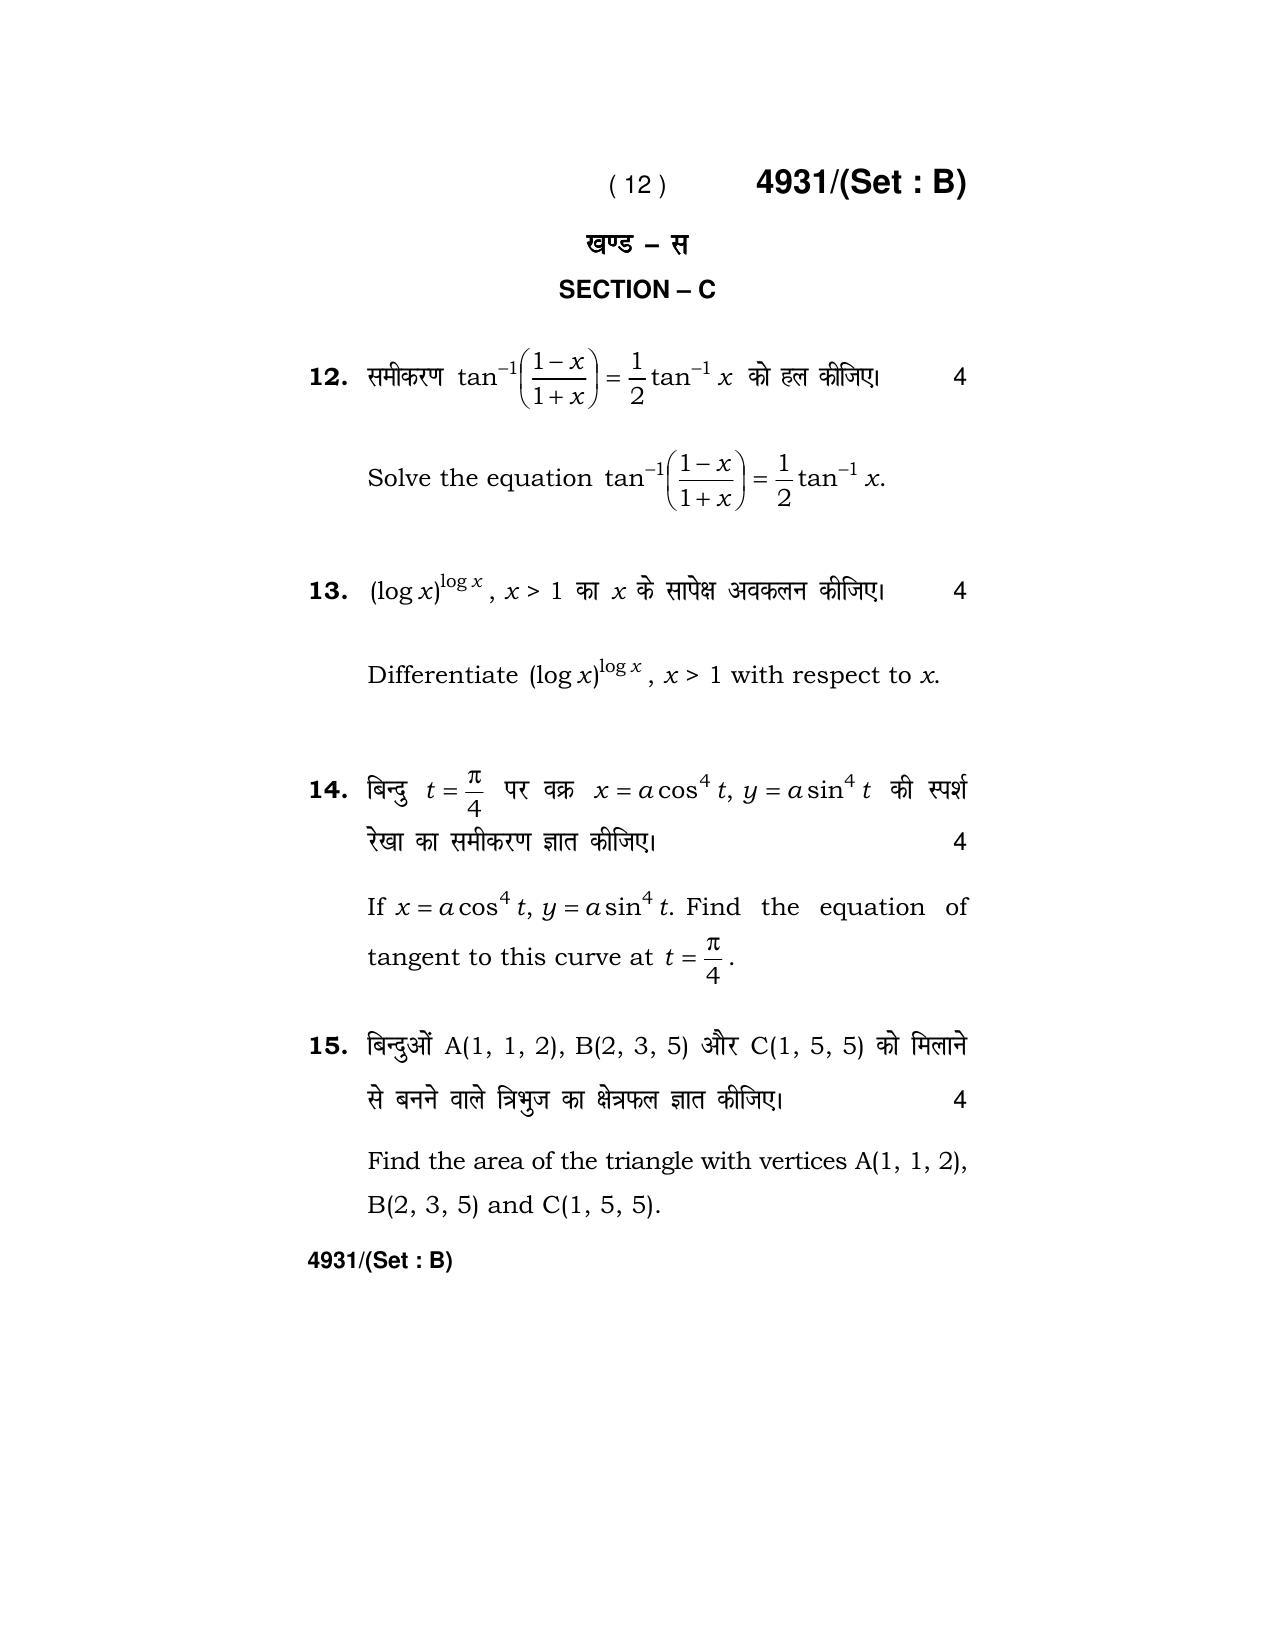 Haryana Board HBSE Class 12 Mathematics 2020 Question Paper - Page 28